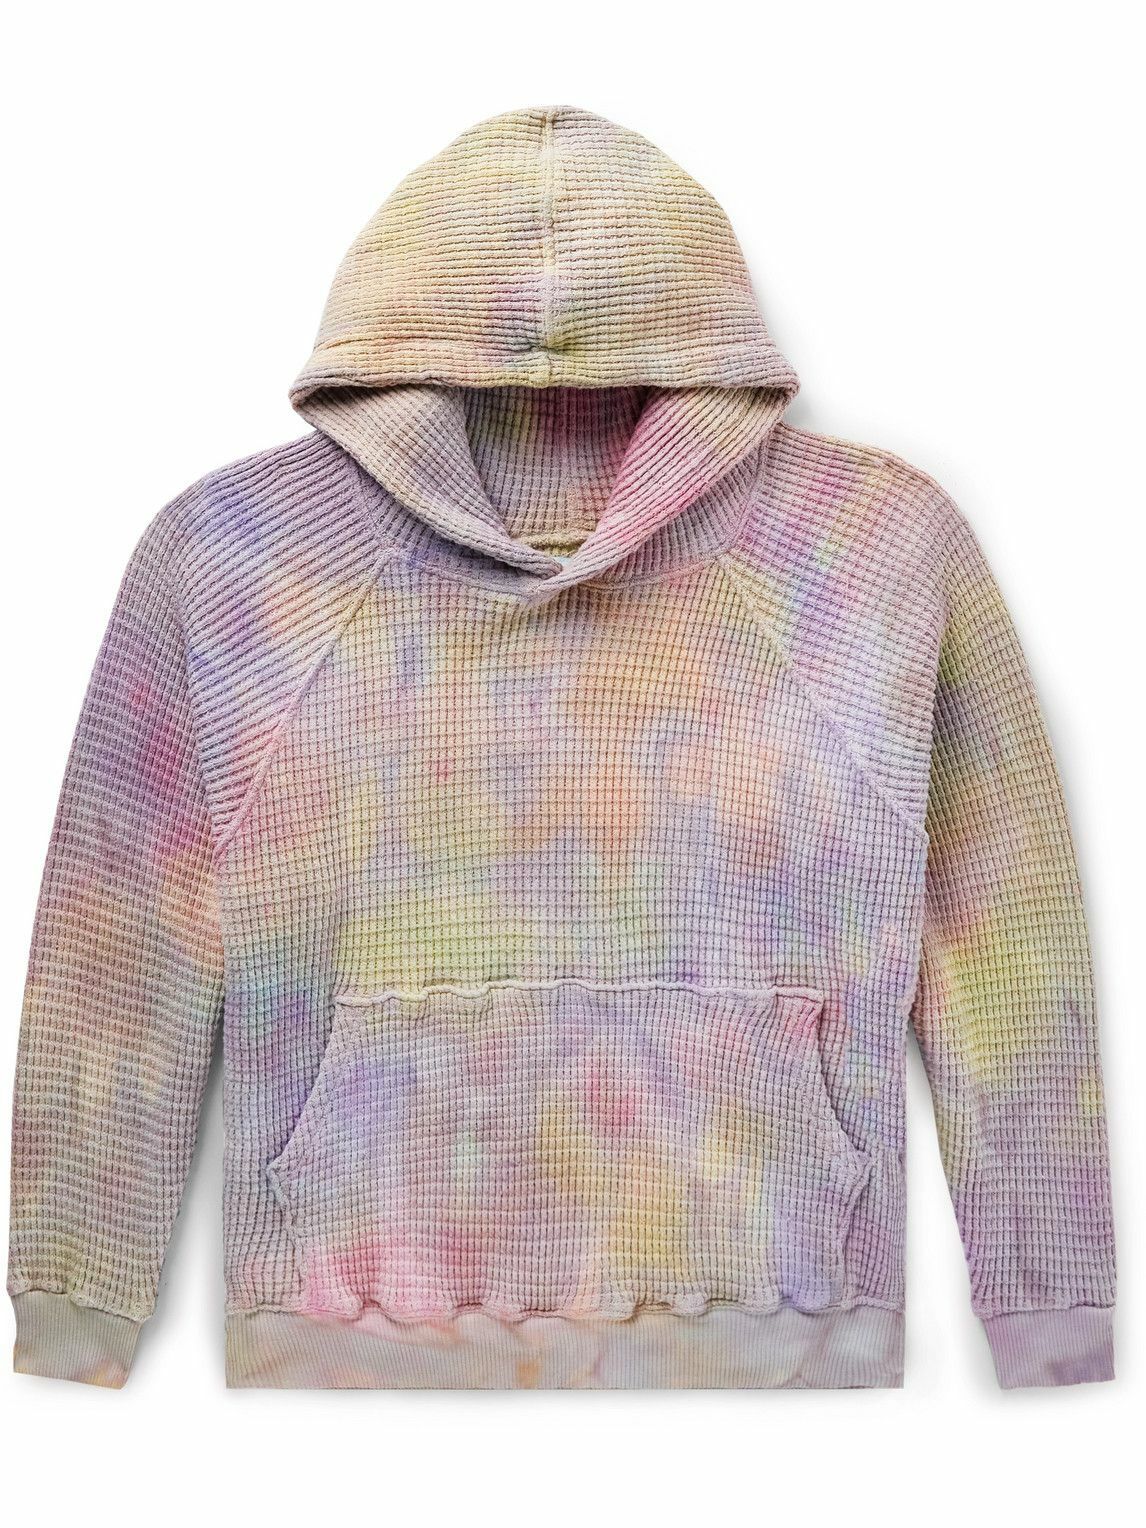 Photo: Camp High - Tie-Dyed Waffle-Knit Cotton Hoodie - Multi